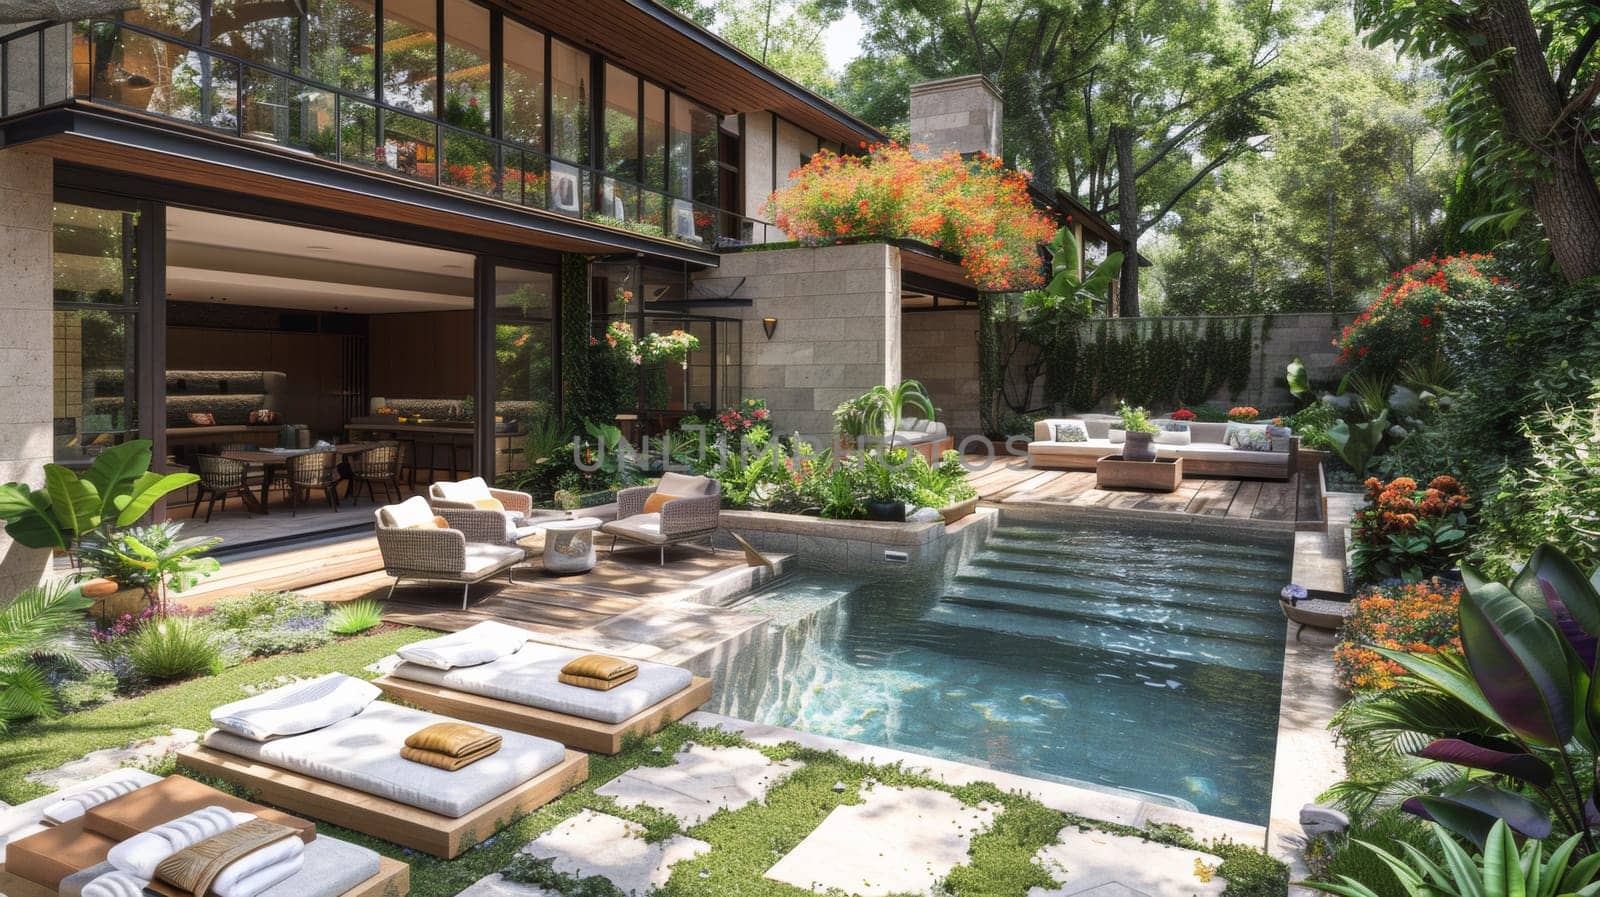 A backyard with a pool and lounge chairs in the middle, AI by starush